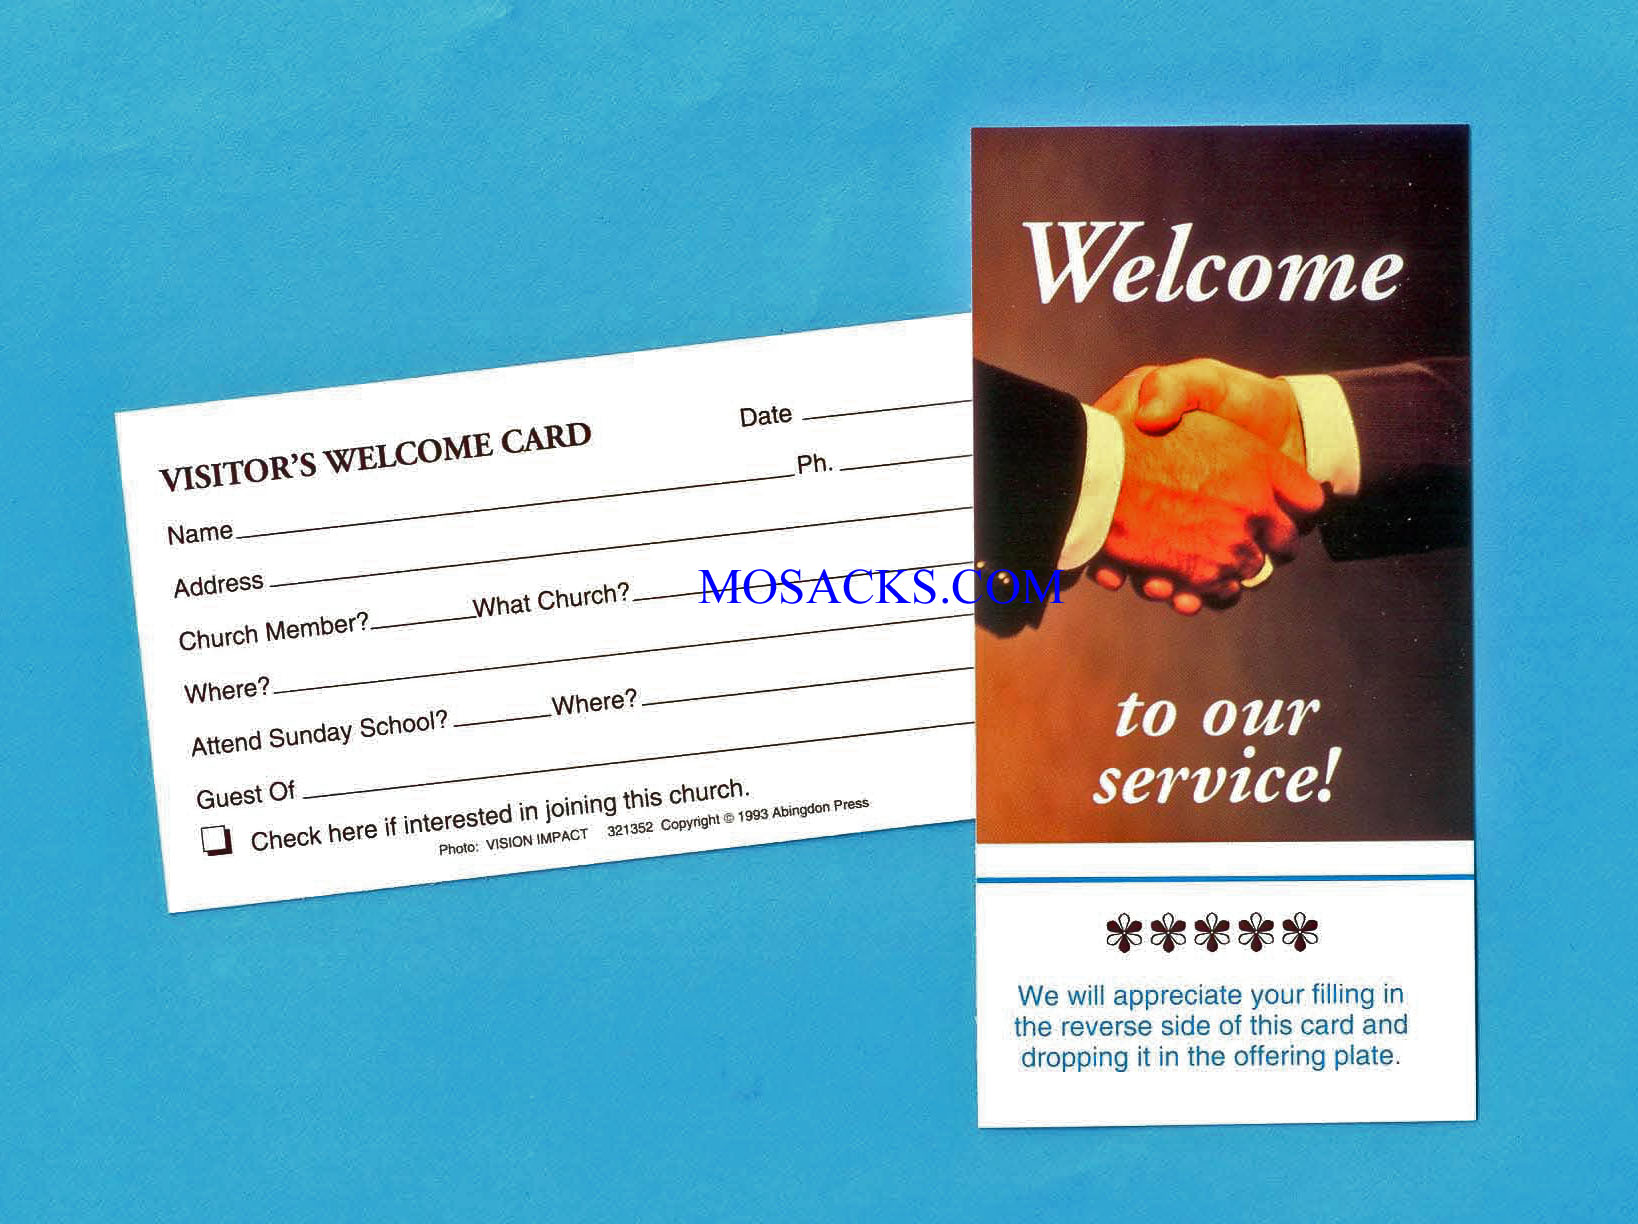 Welcome To Our Service Card 3" x 5", 25 Count